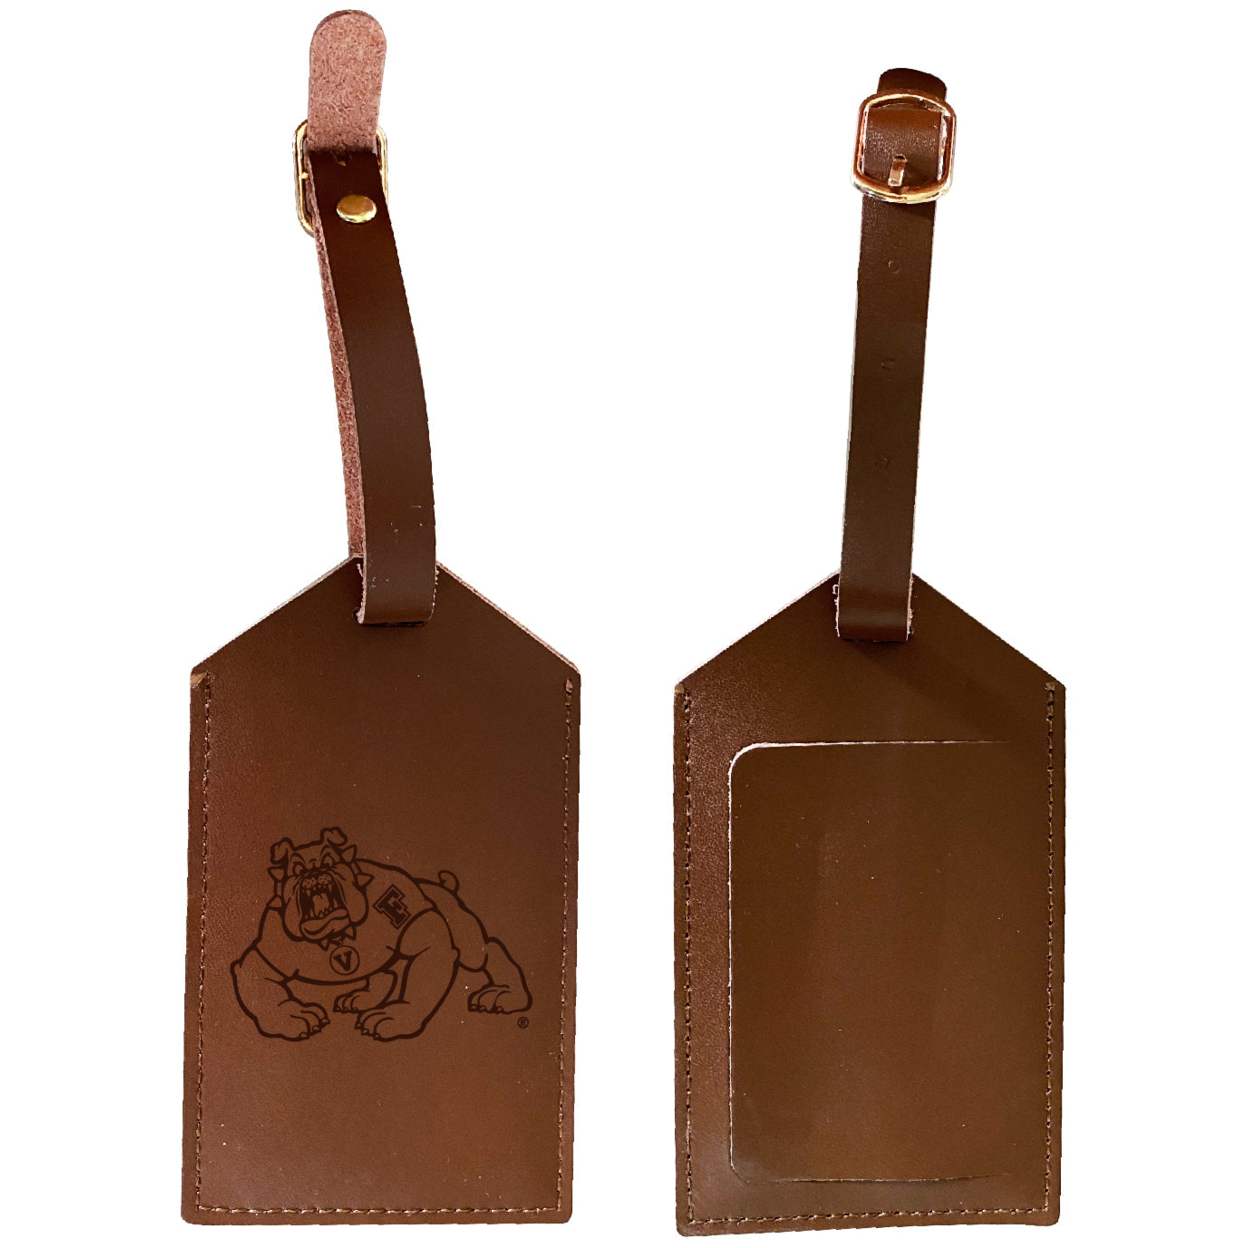 Fresno State Bulldogs Leather Luggage Tag Engraved